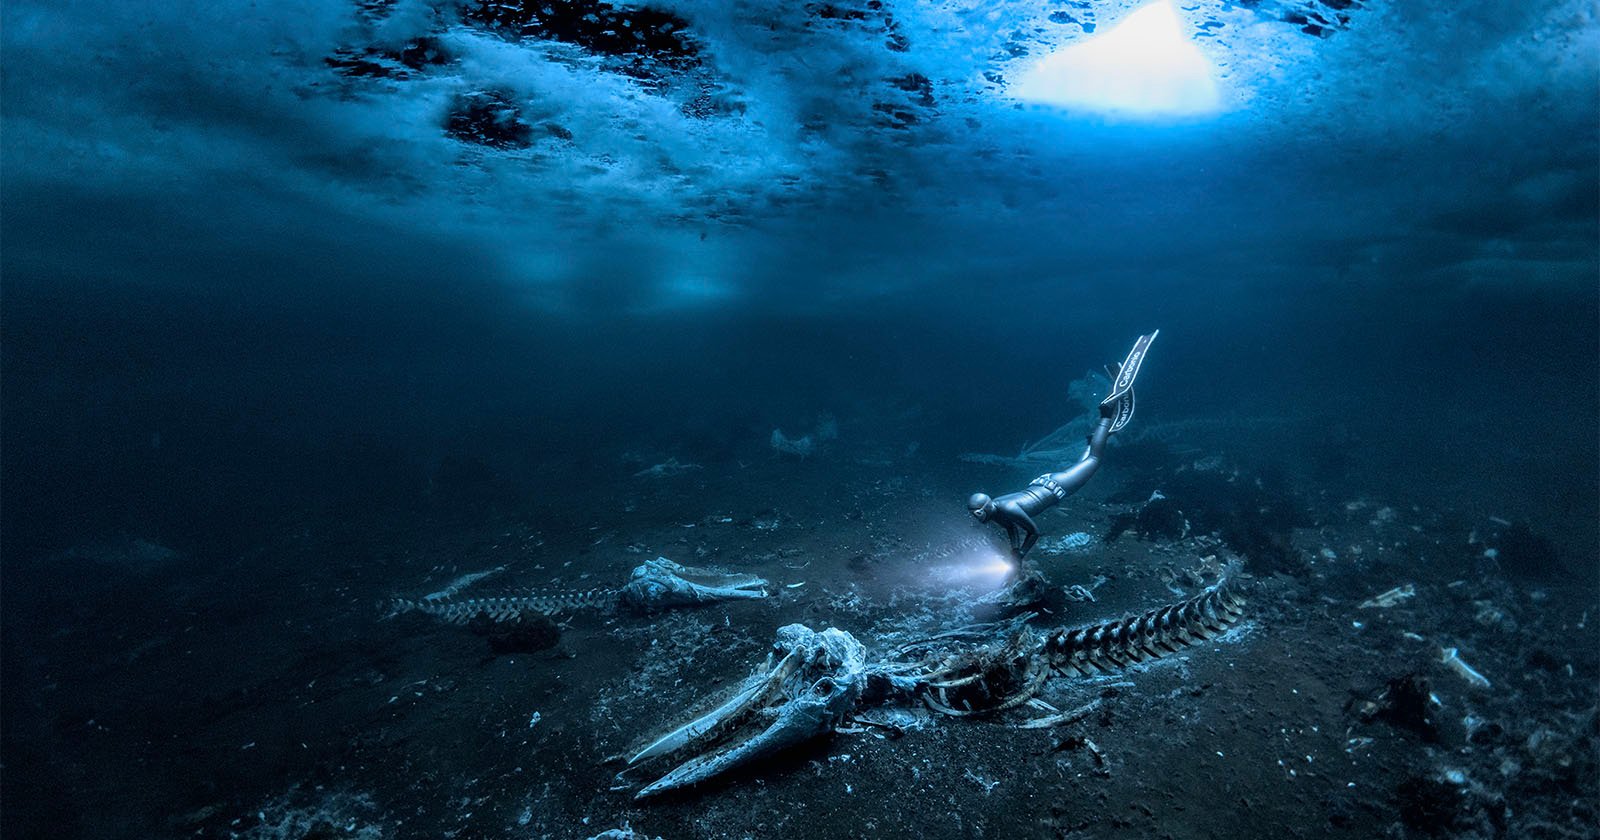  haunting image whale skeletons wins underwater photographer 